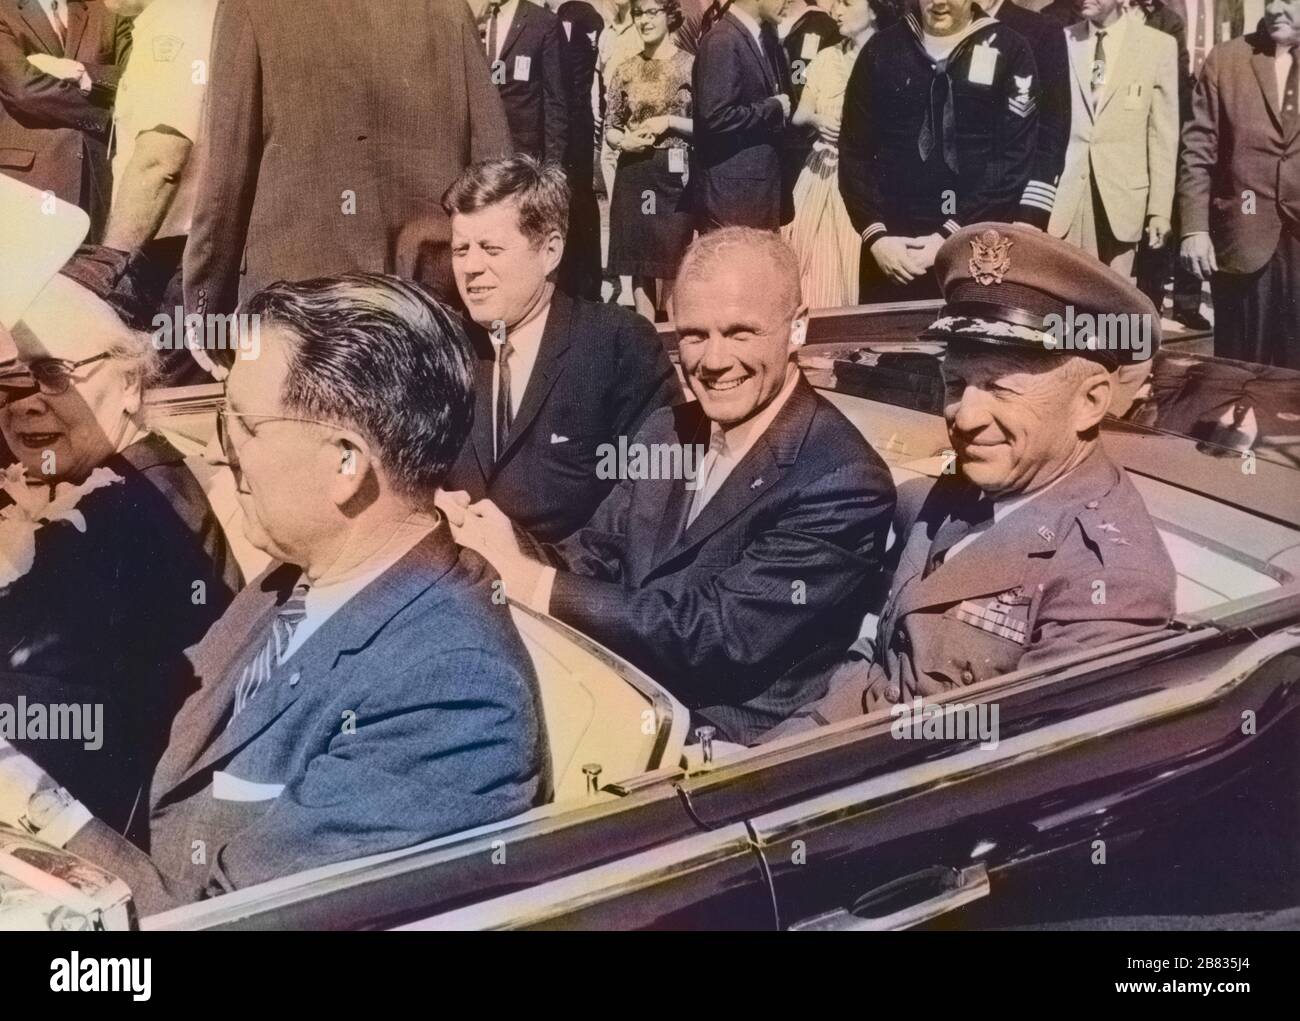 President John F. Kennedy, John Glenn and General Leighton I. Davis riding in a car during a Cocoa Beach parade, Cocoa Beach, Florida, February 23, 1962. Image courtesy National Aeronautics and Space Administration (NASA). Note: Image has been digitally colorized using a modern process. Colors may not be period-accurate. () Stock Photo